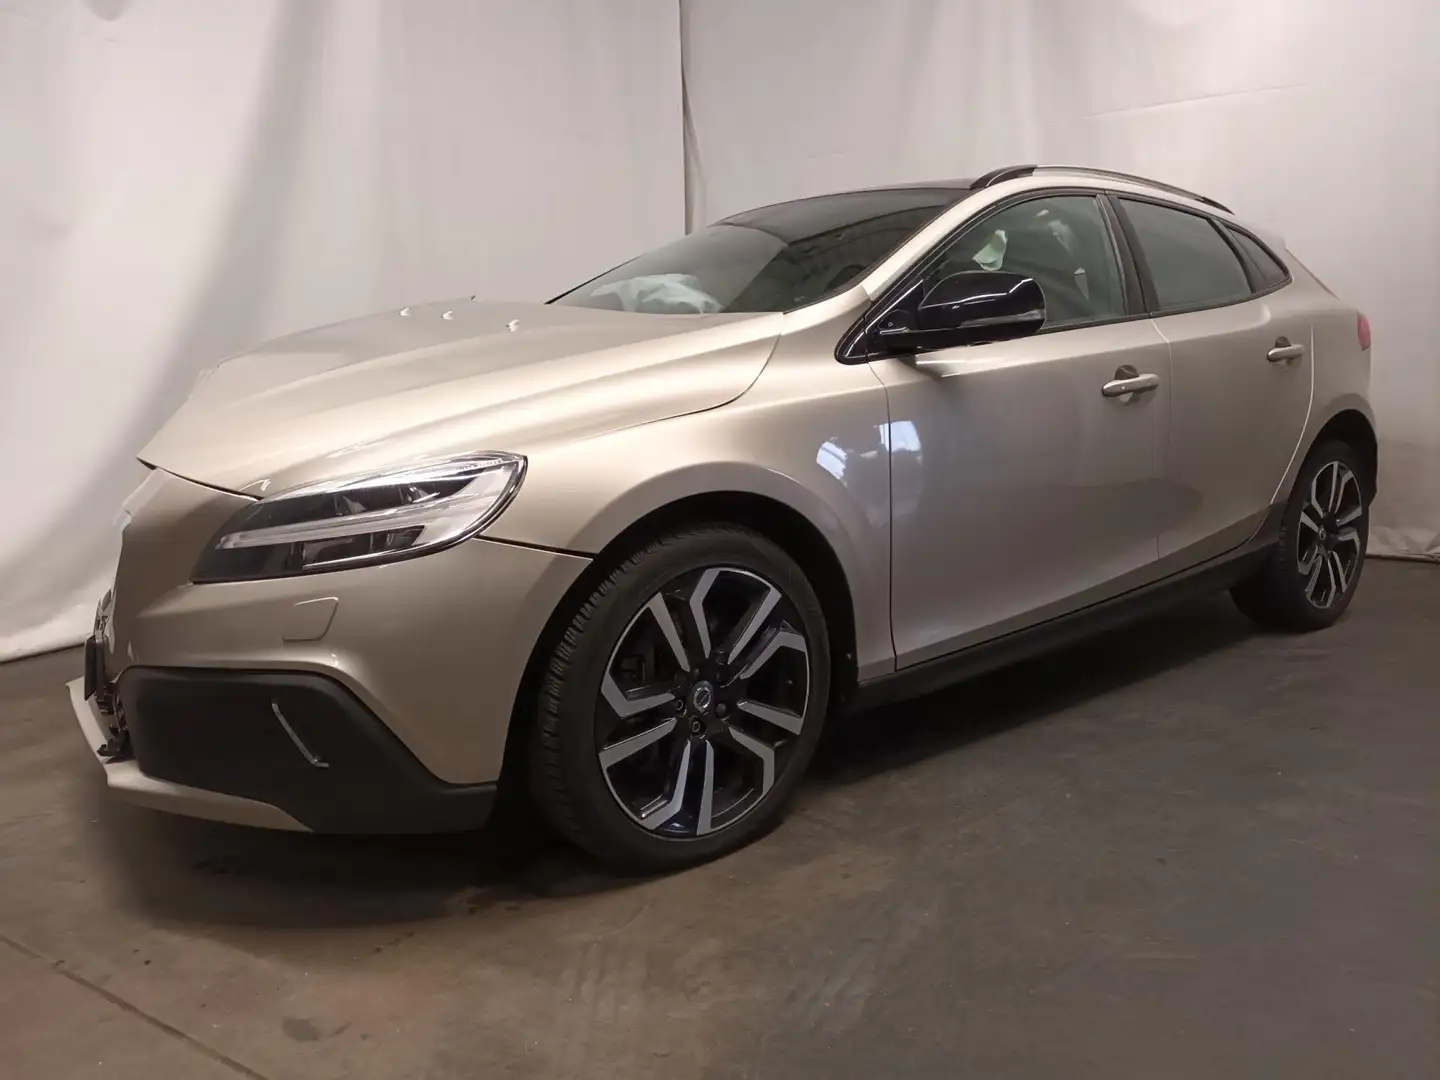 Volvo V40 Cross Country 1.5 T3 Nordic+ - Front Schade - Airbags Defect Barna - 2